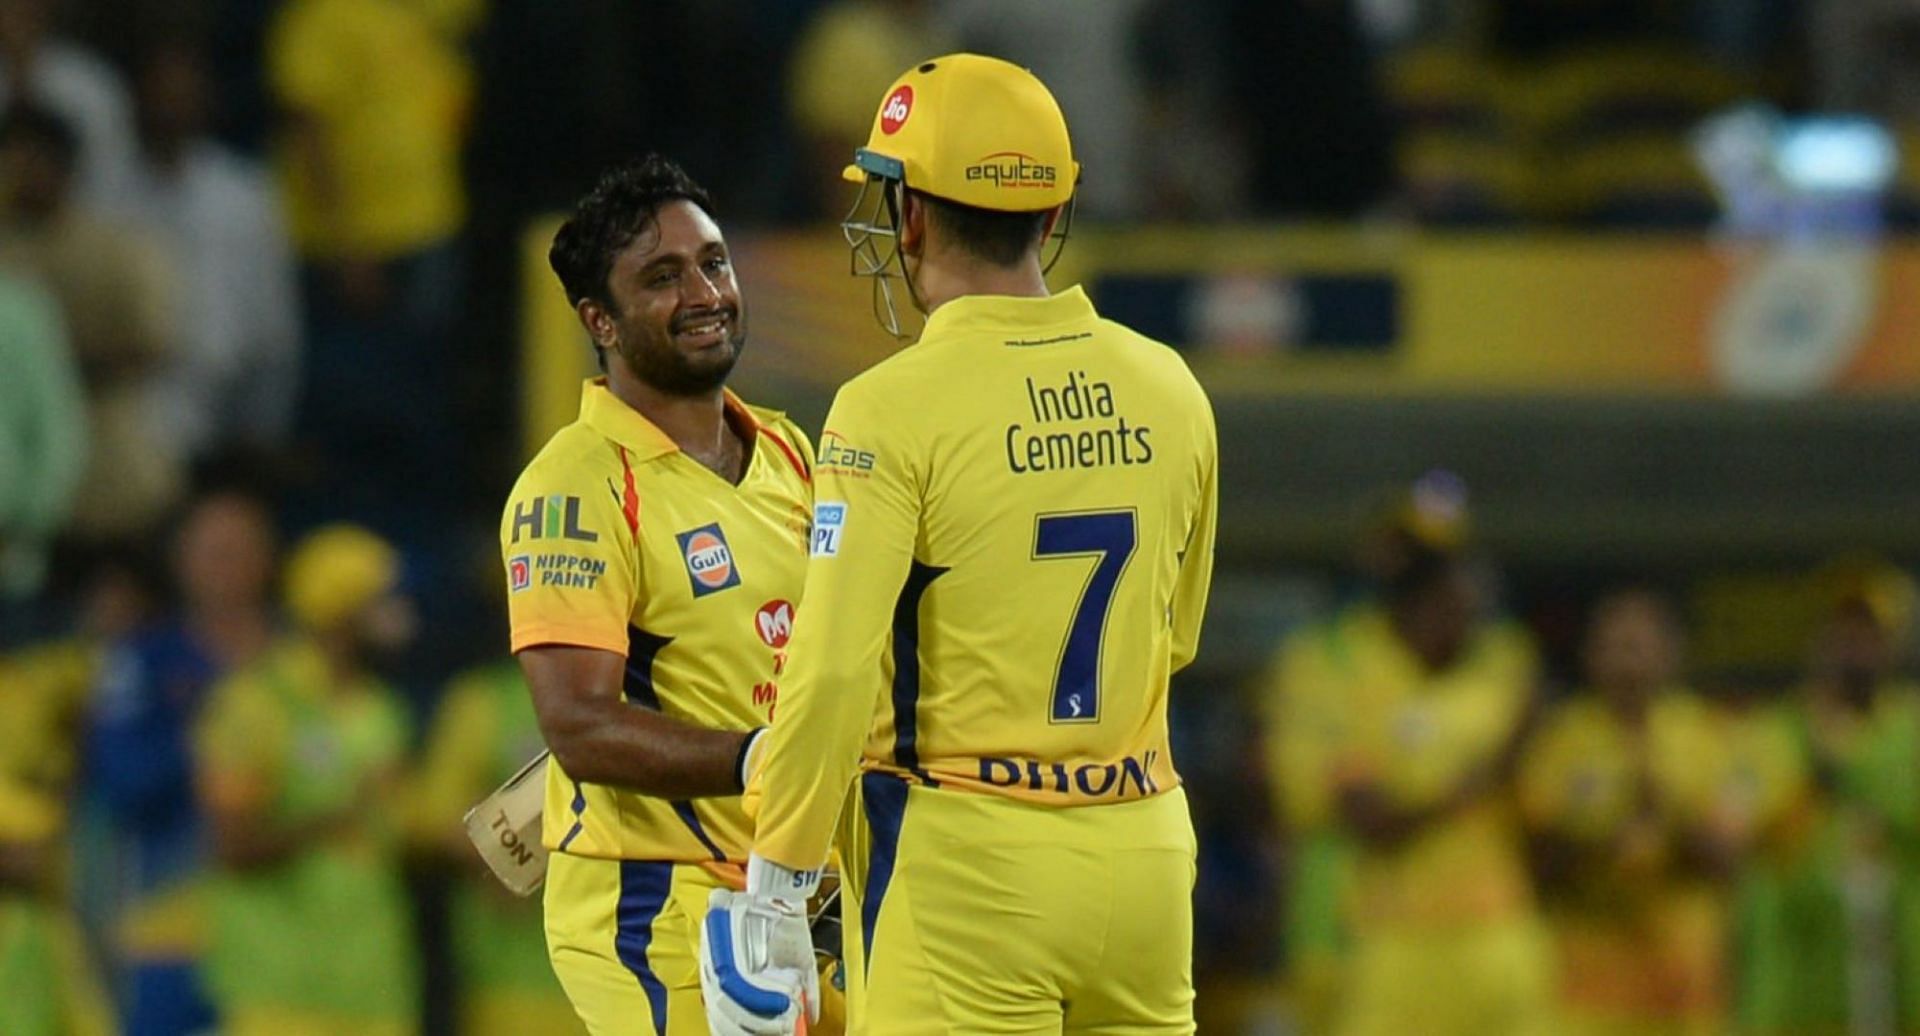 Rayudu has played for CSK under MS Dhoni since 2018